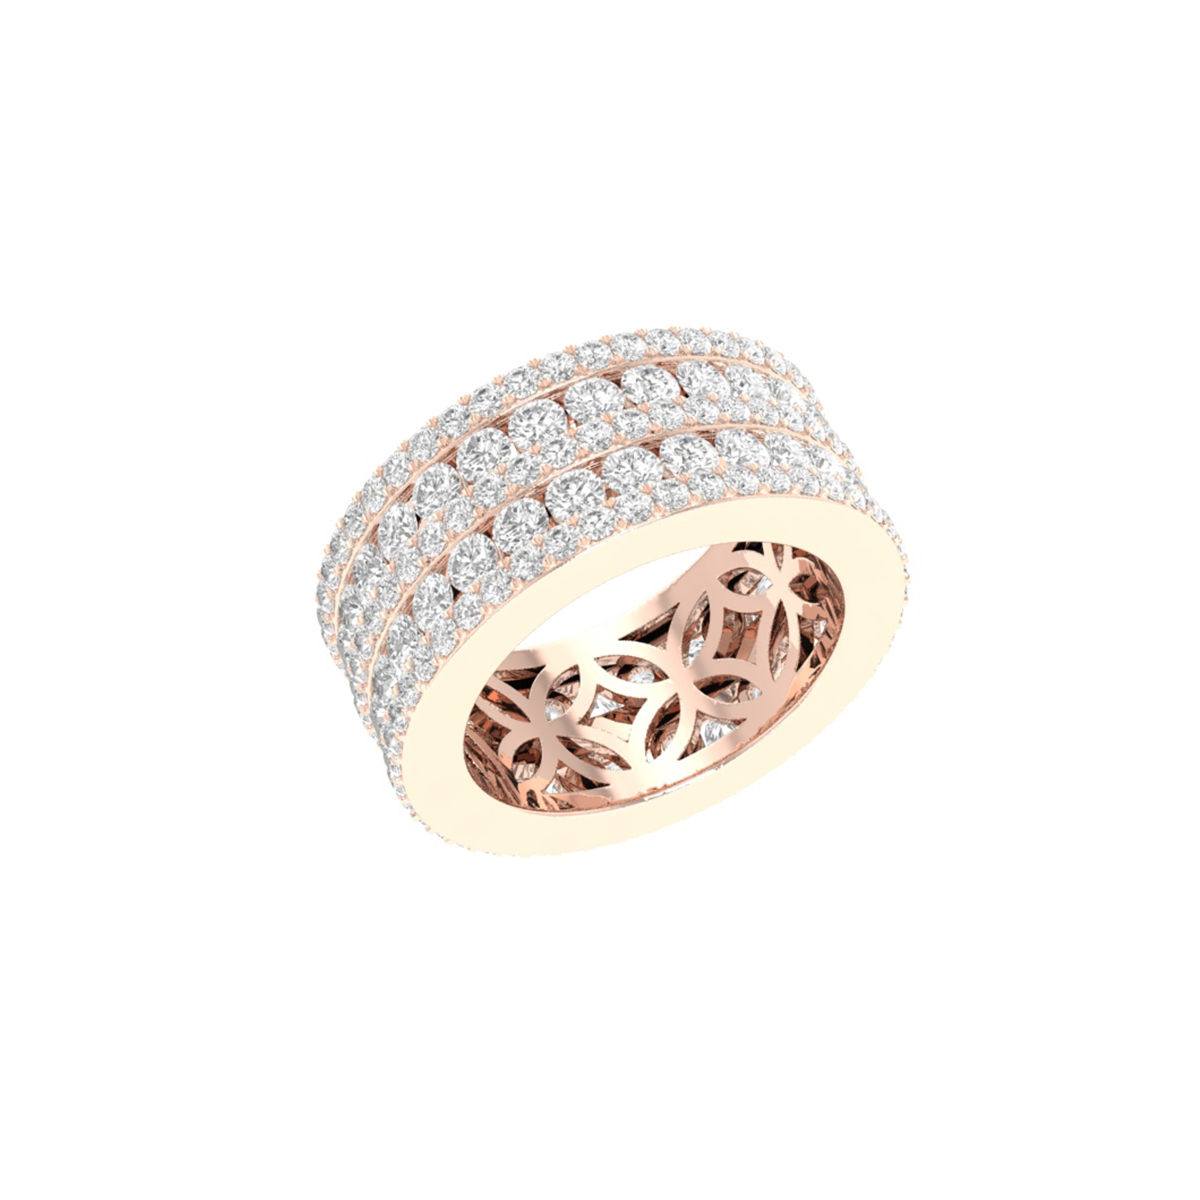 ICED OUT BRILLIANCE DIAMOND RING - The Ice Champ